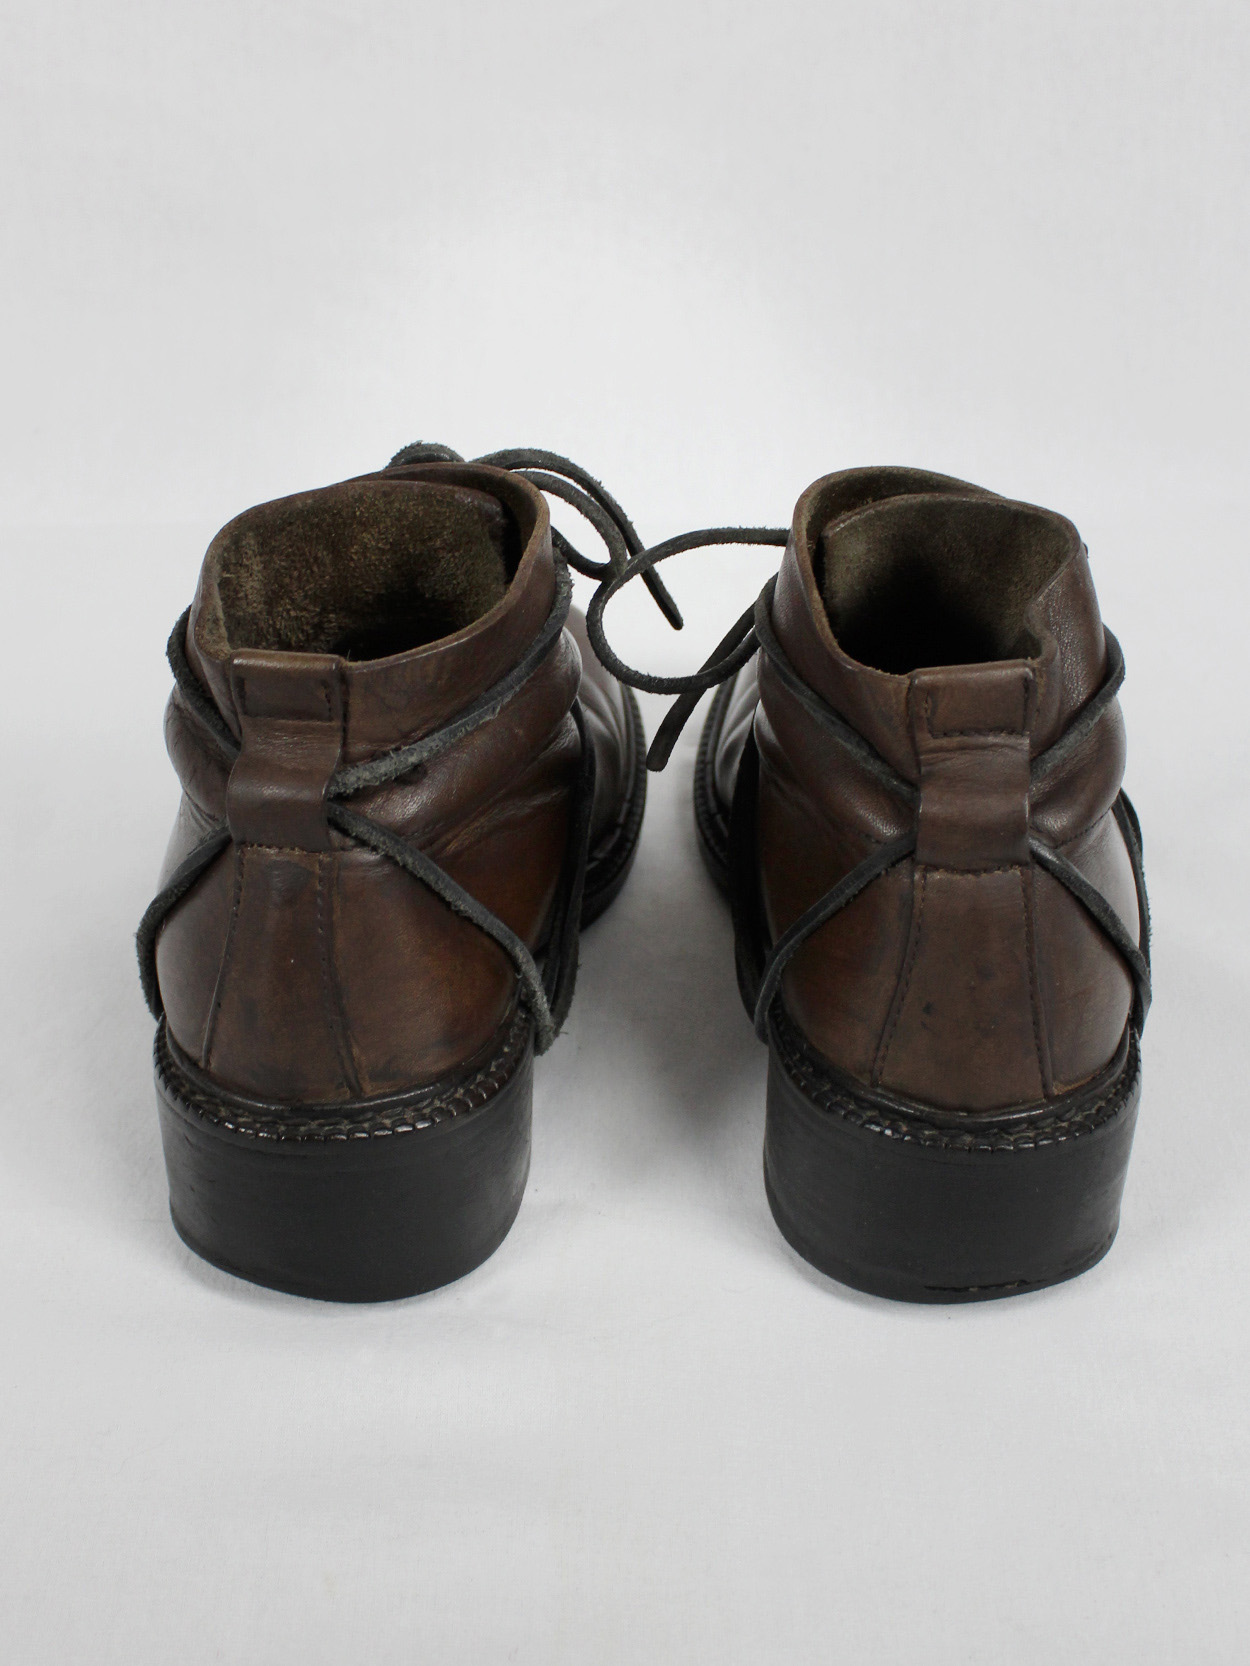 Dirk Bikkembergs brown boots with flap and laces through the soles (59) — fall 1994